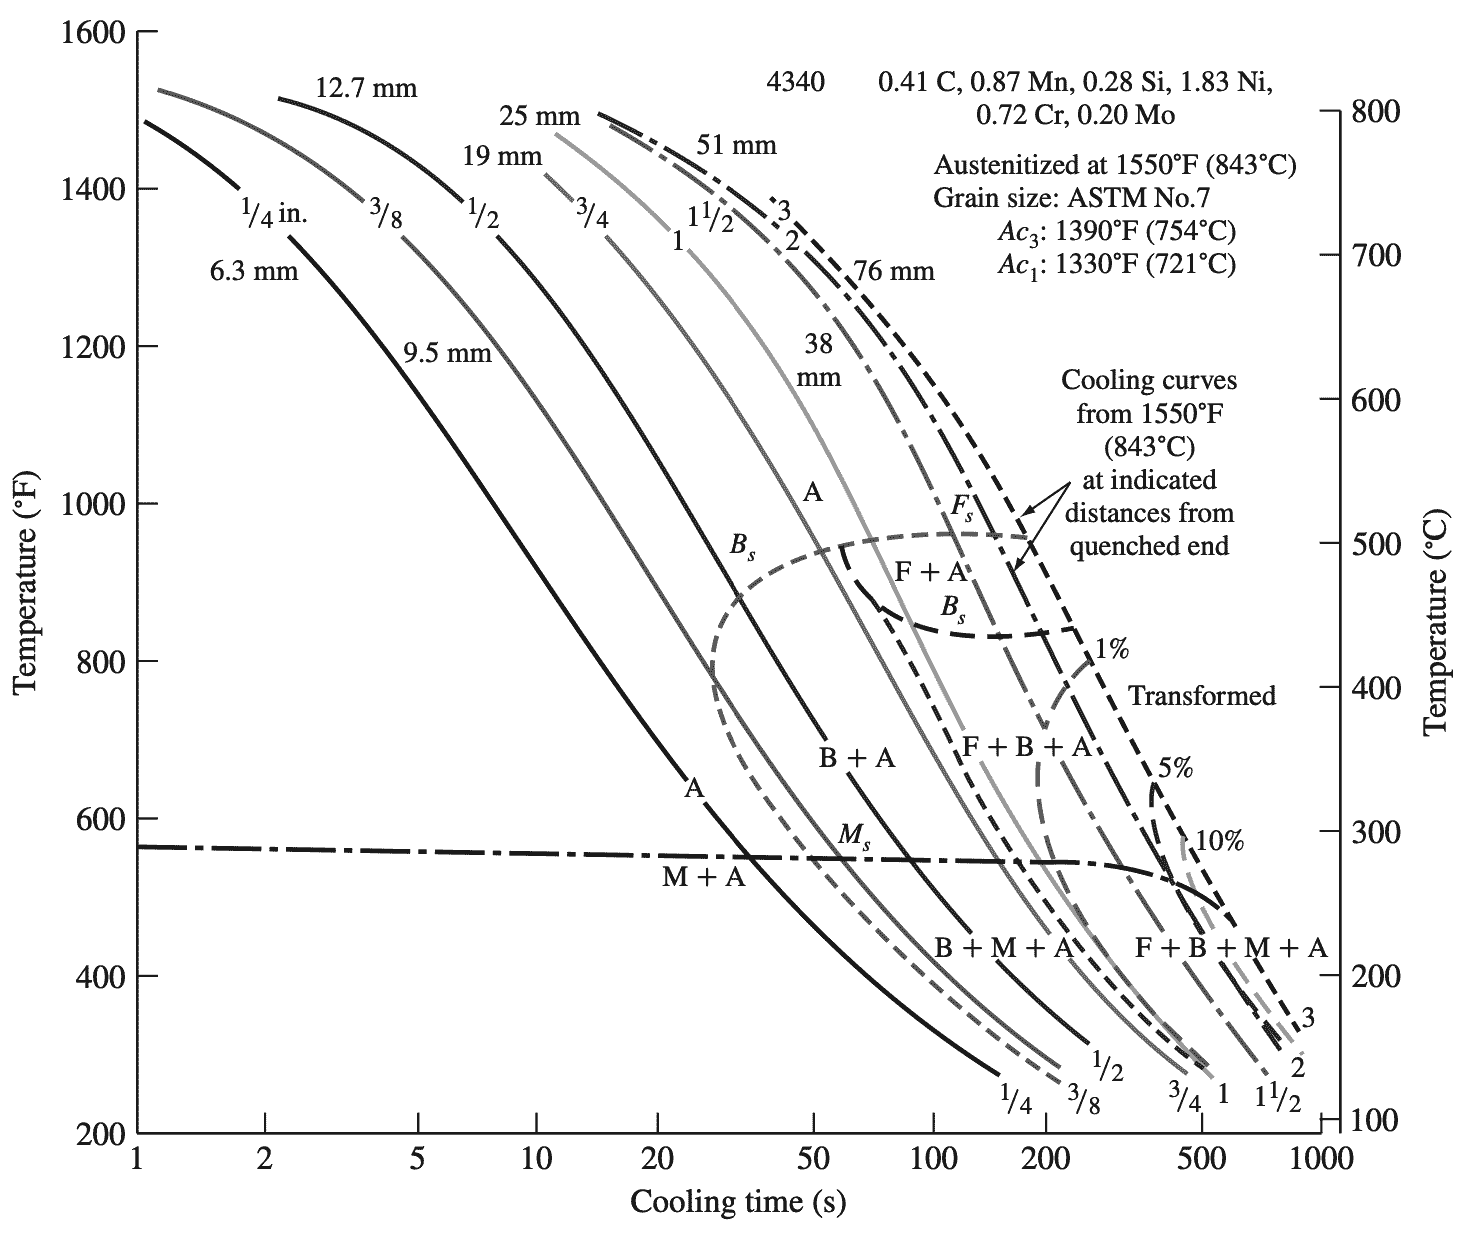 Continuous-cooling transformation diagram for AISI 4340 alloy steel. 